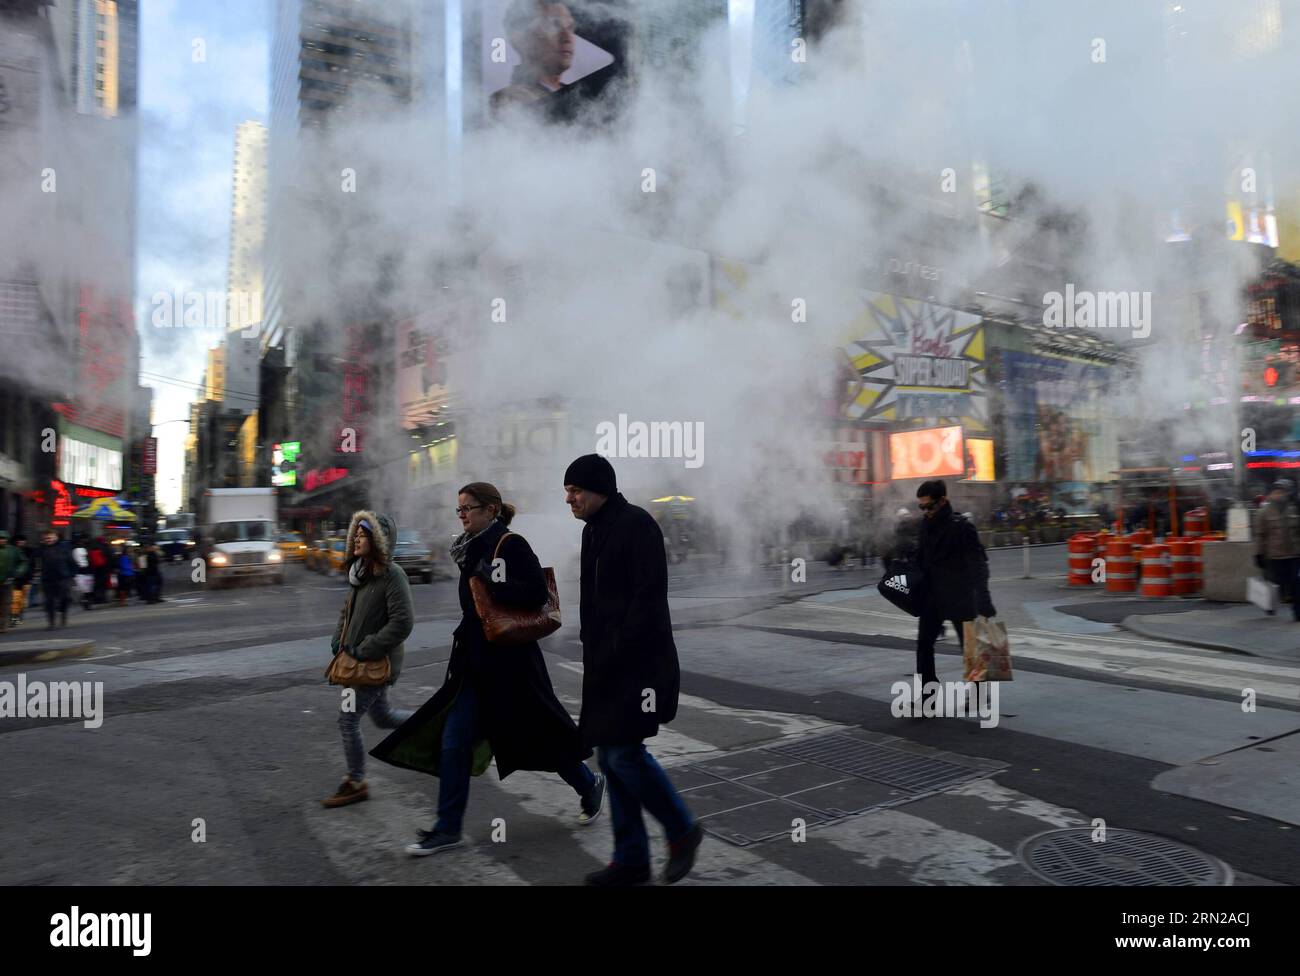 People walk in low temperatures at Times Square in New York City, the United States, on Feb. 20, 2015. New York City Emergency Management has issued a weather alert for dangerous cold temperatures for Feb. 20, followed by a wintry mix of snow, sleet and freezing rain. A bitterly cold chill known as the Siberian Express has enveloped much of eastern America, sending temperatures plummeting below their normal February levels to record lows in at least 100 places. ) US-NEW YORK-WEATHER-COLD WAVE WangxLei PUBLICATIONxNOTxINxCHN   Celebrities Walk in Low temperatures AT Times Square in New York Cit Stock Photo